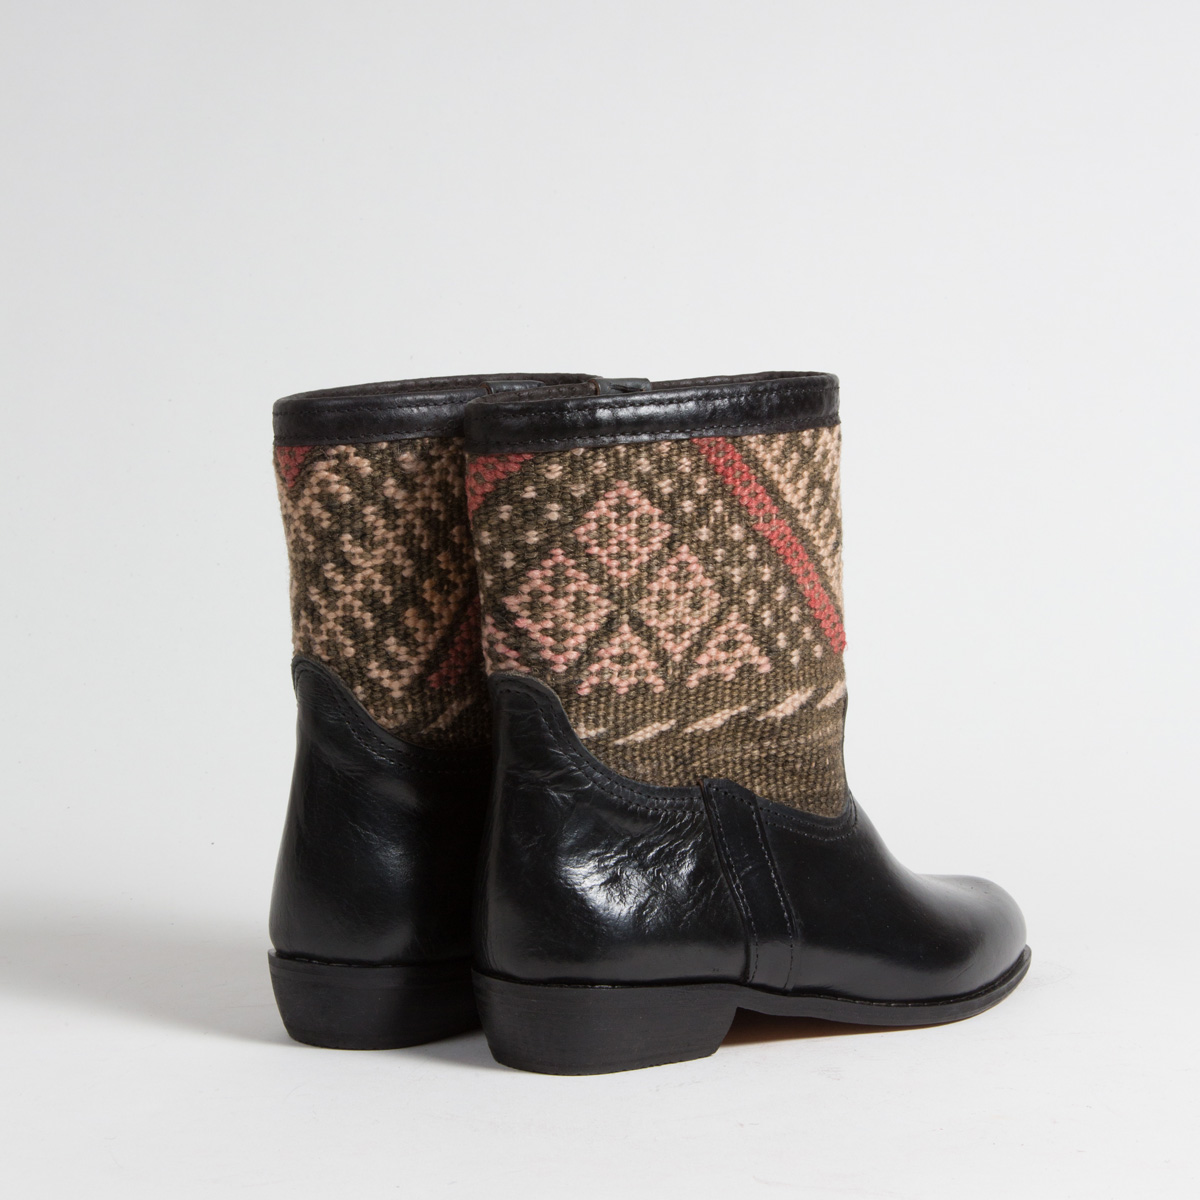 Bottines Kilim cuir mababouche artisanales (Réf. RPN19-39)